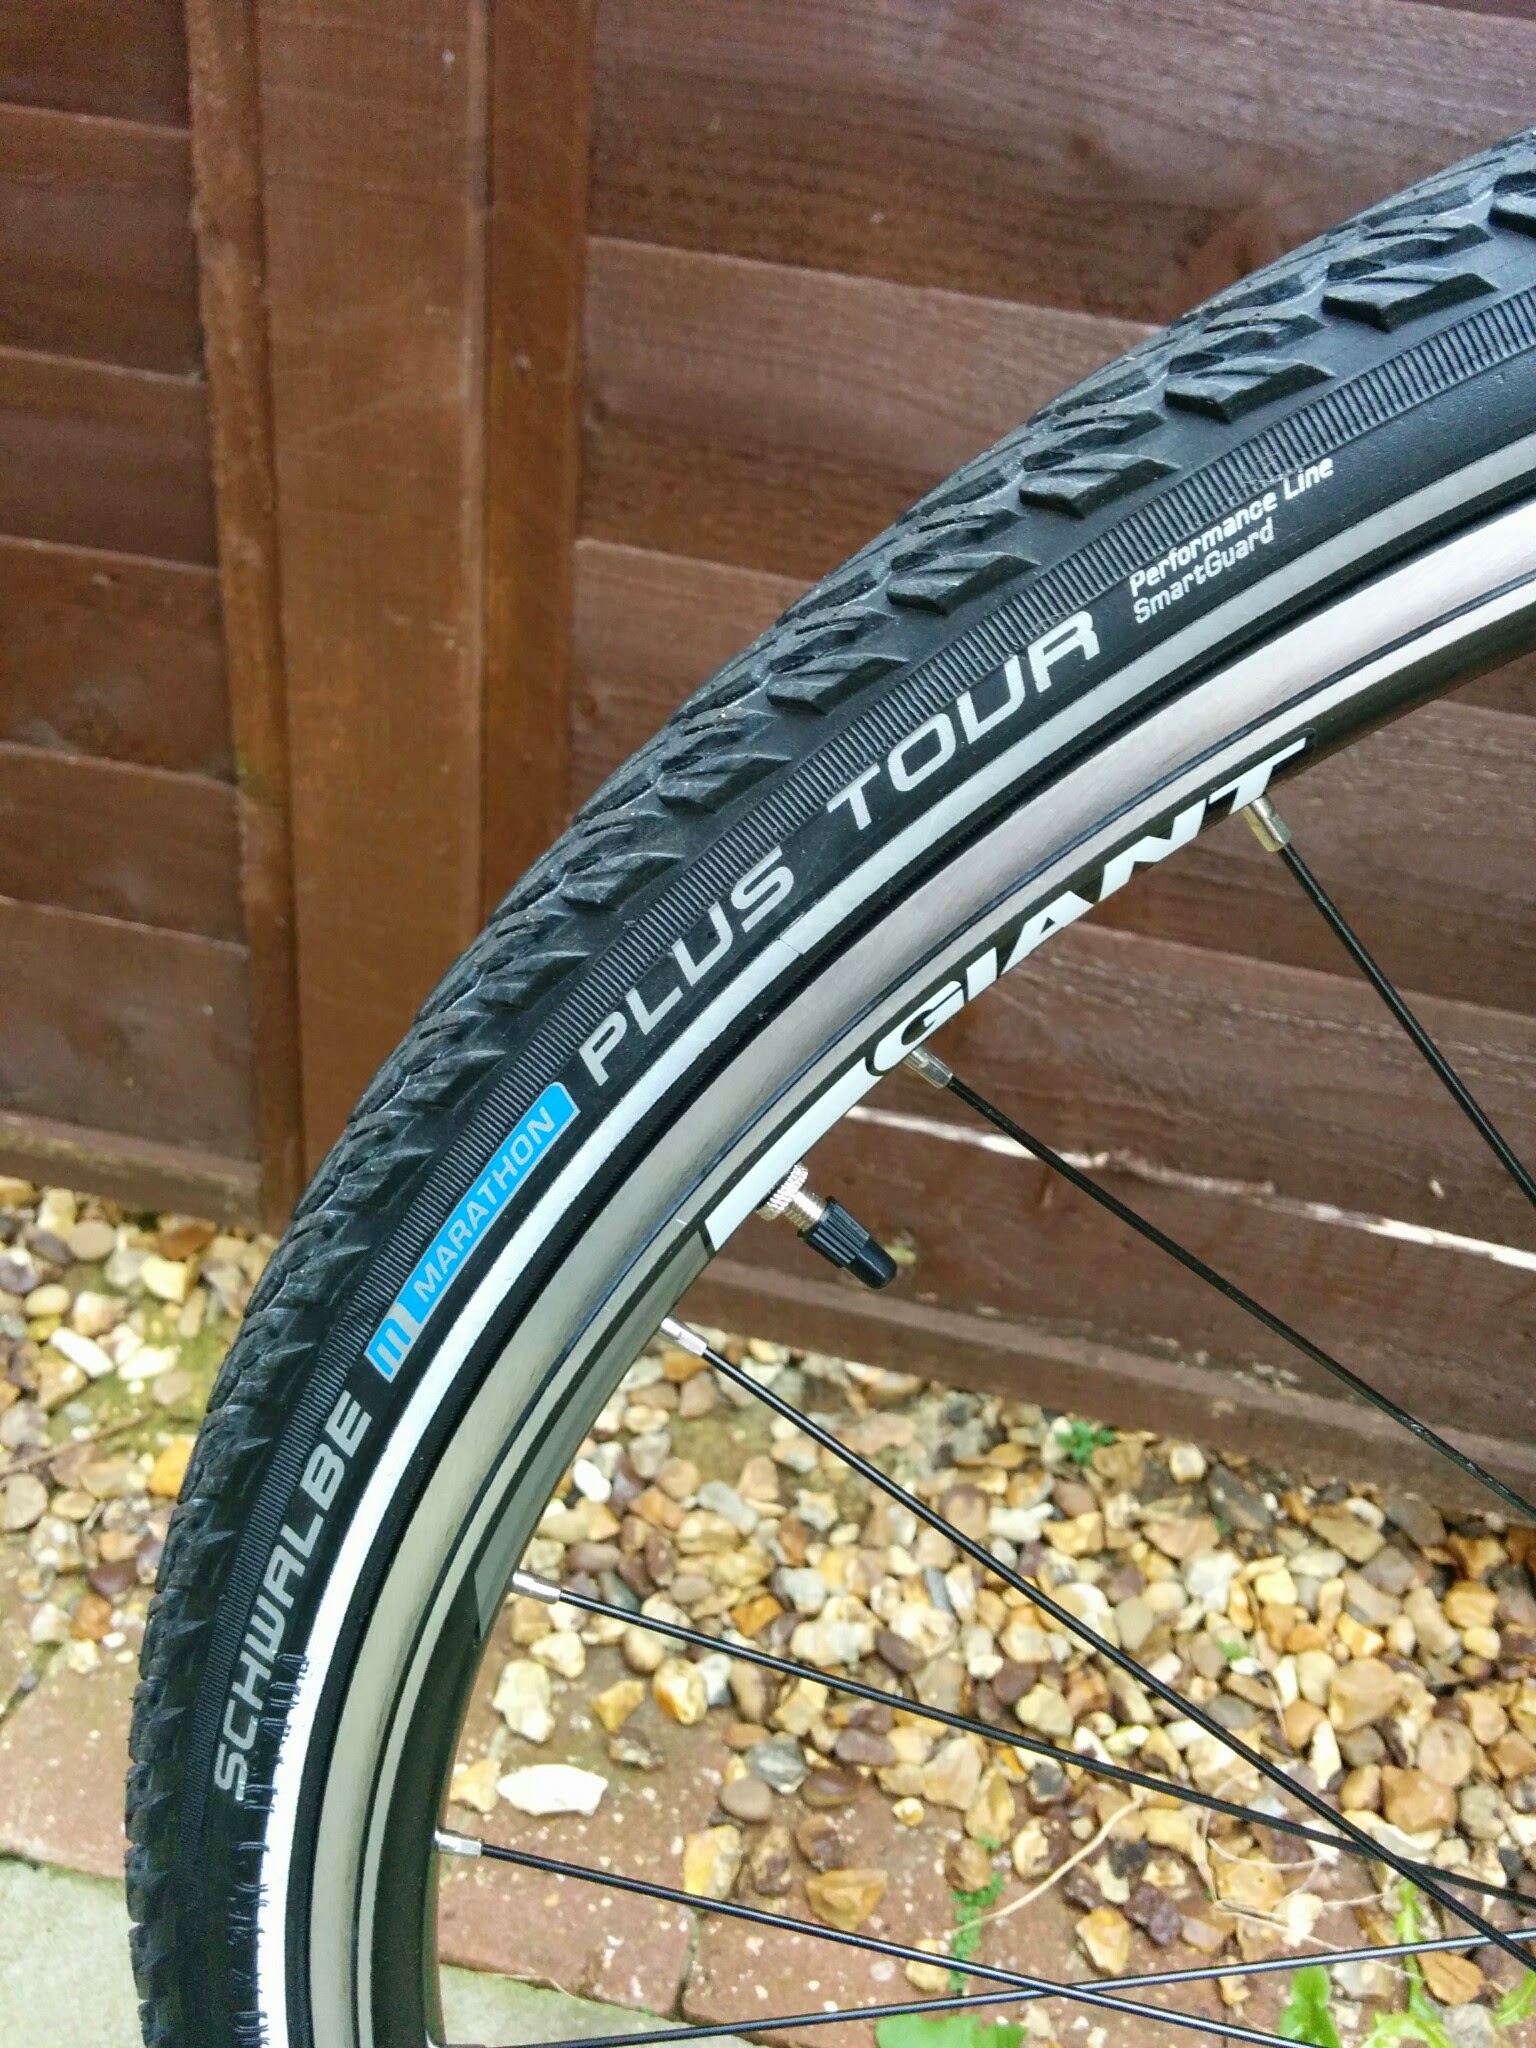 Puncture Proof Tyres